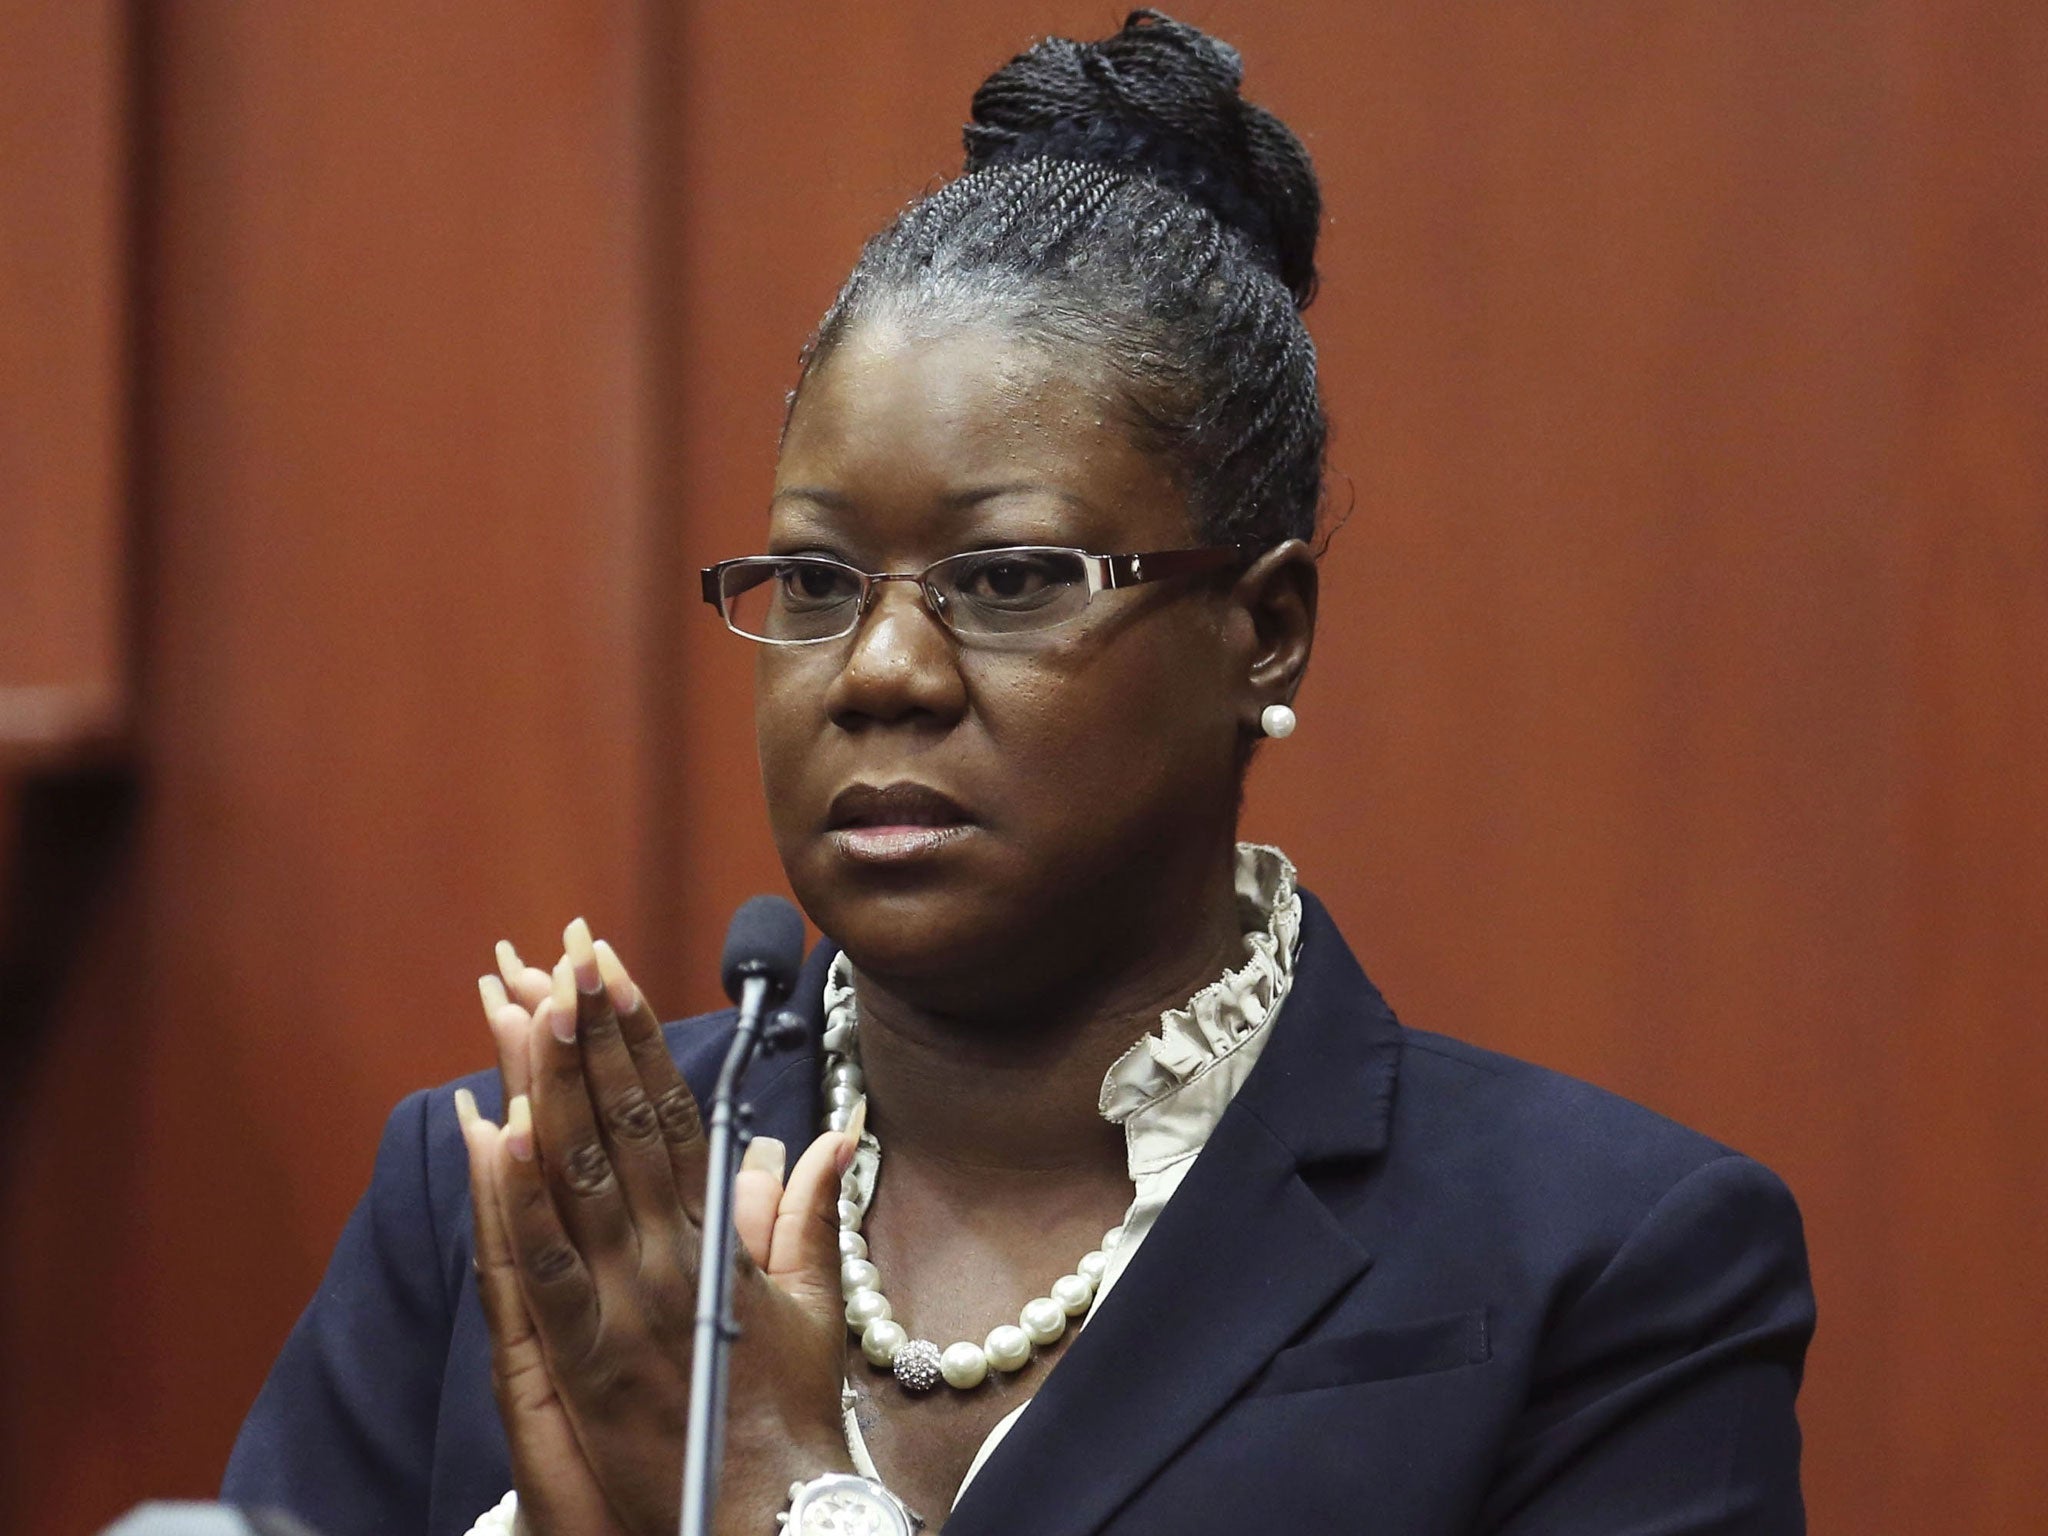 Sybrina Fulton takes the stand during George Zimmerman’s trial in Sanford, Florida